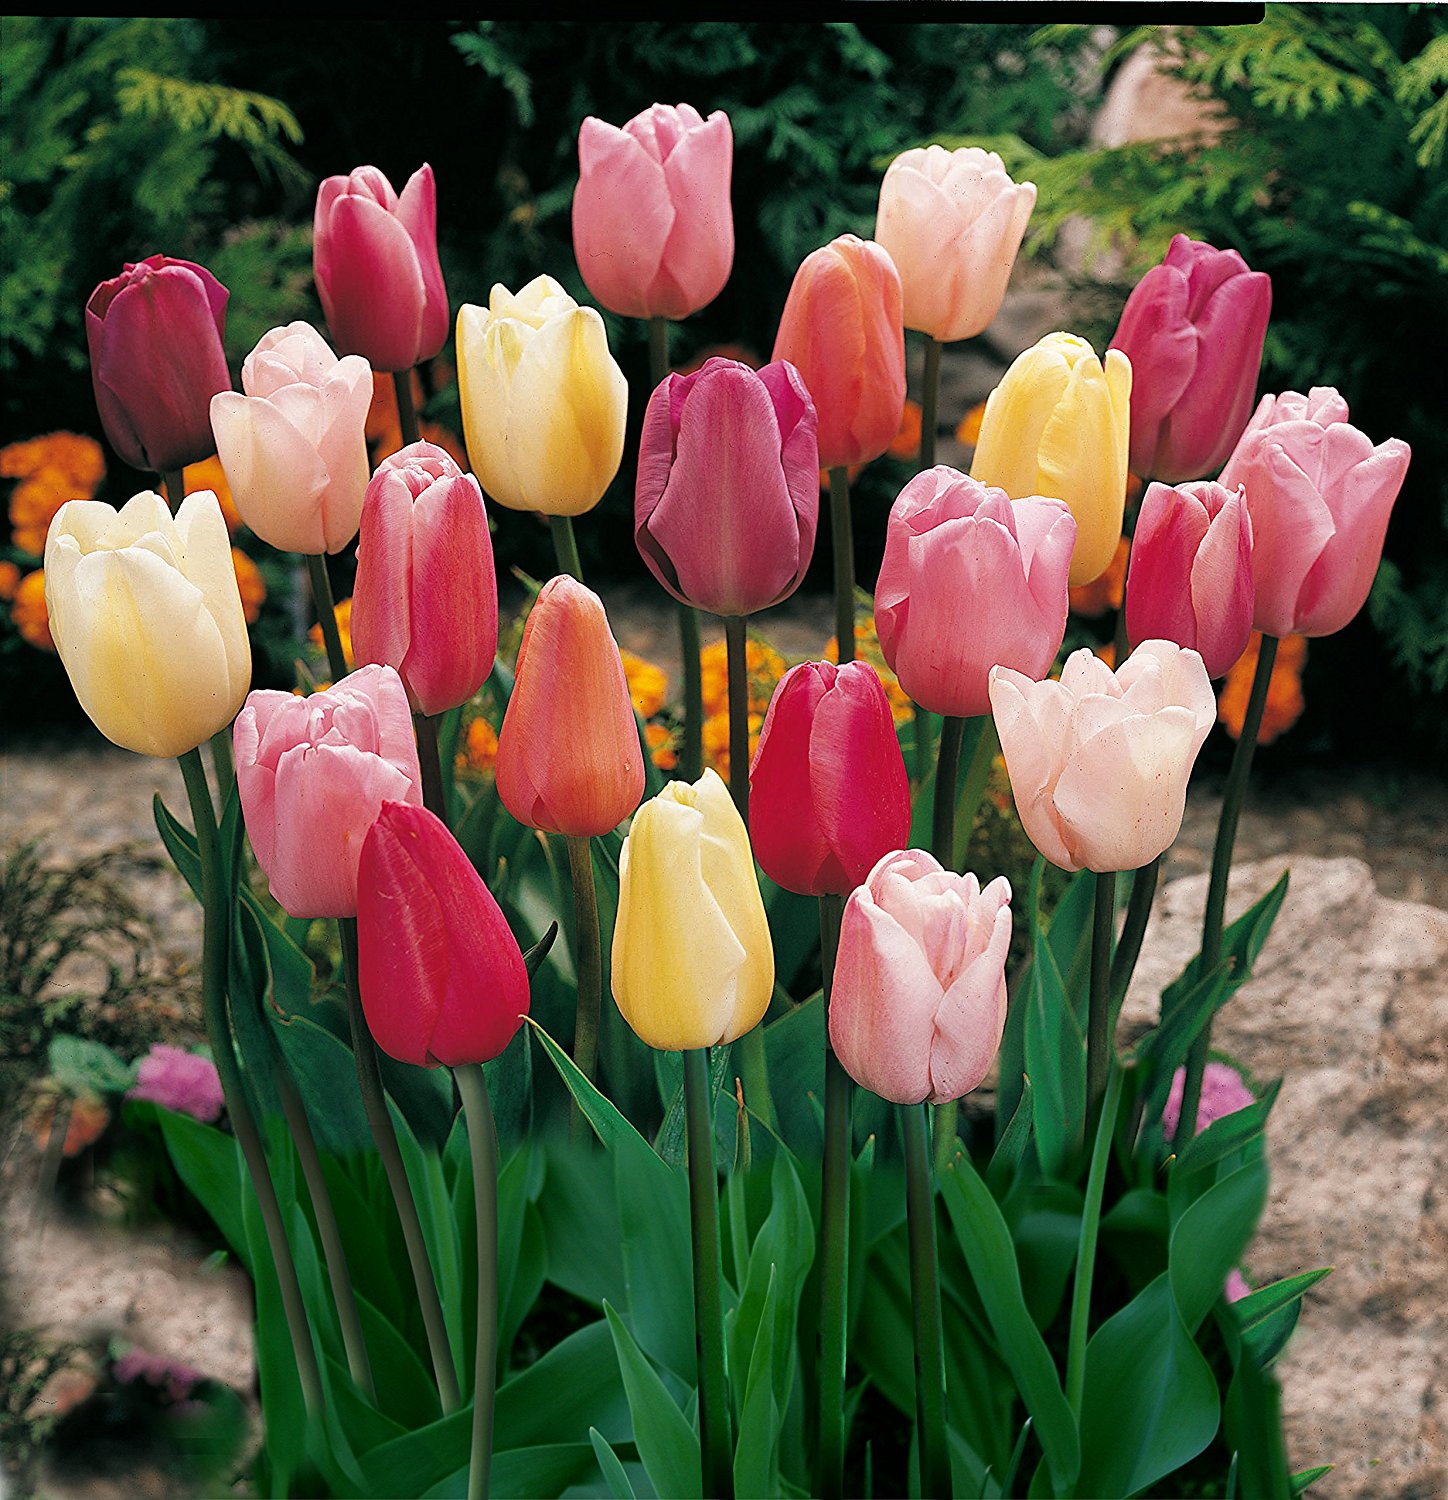 Amazon.com : Mixed Triumph Tulips (25 Bulbs) - Assorted Colors of ...